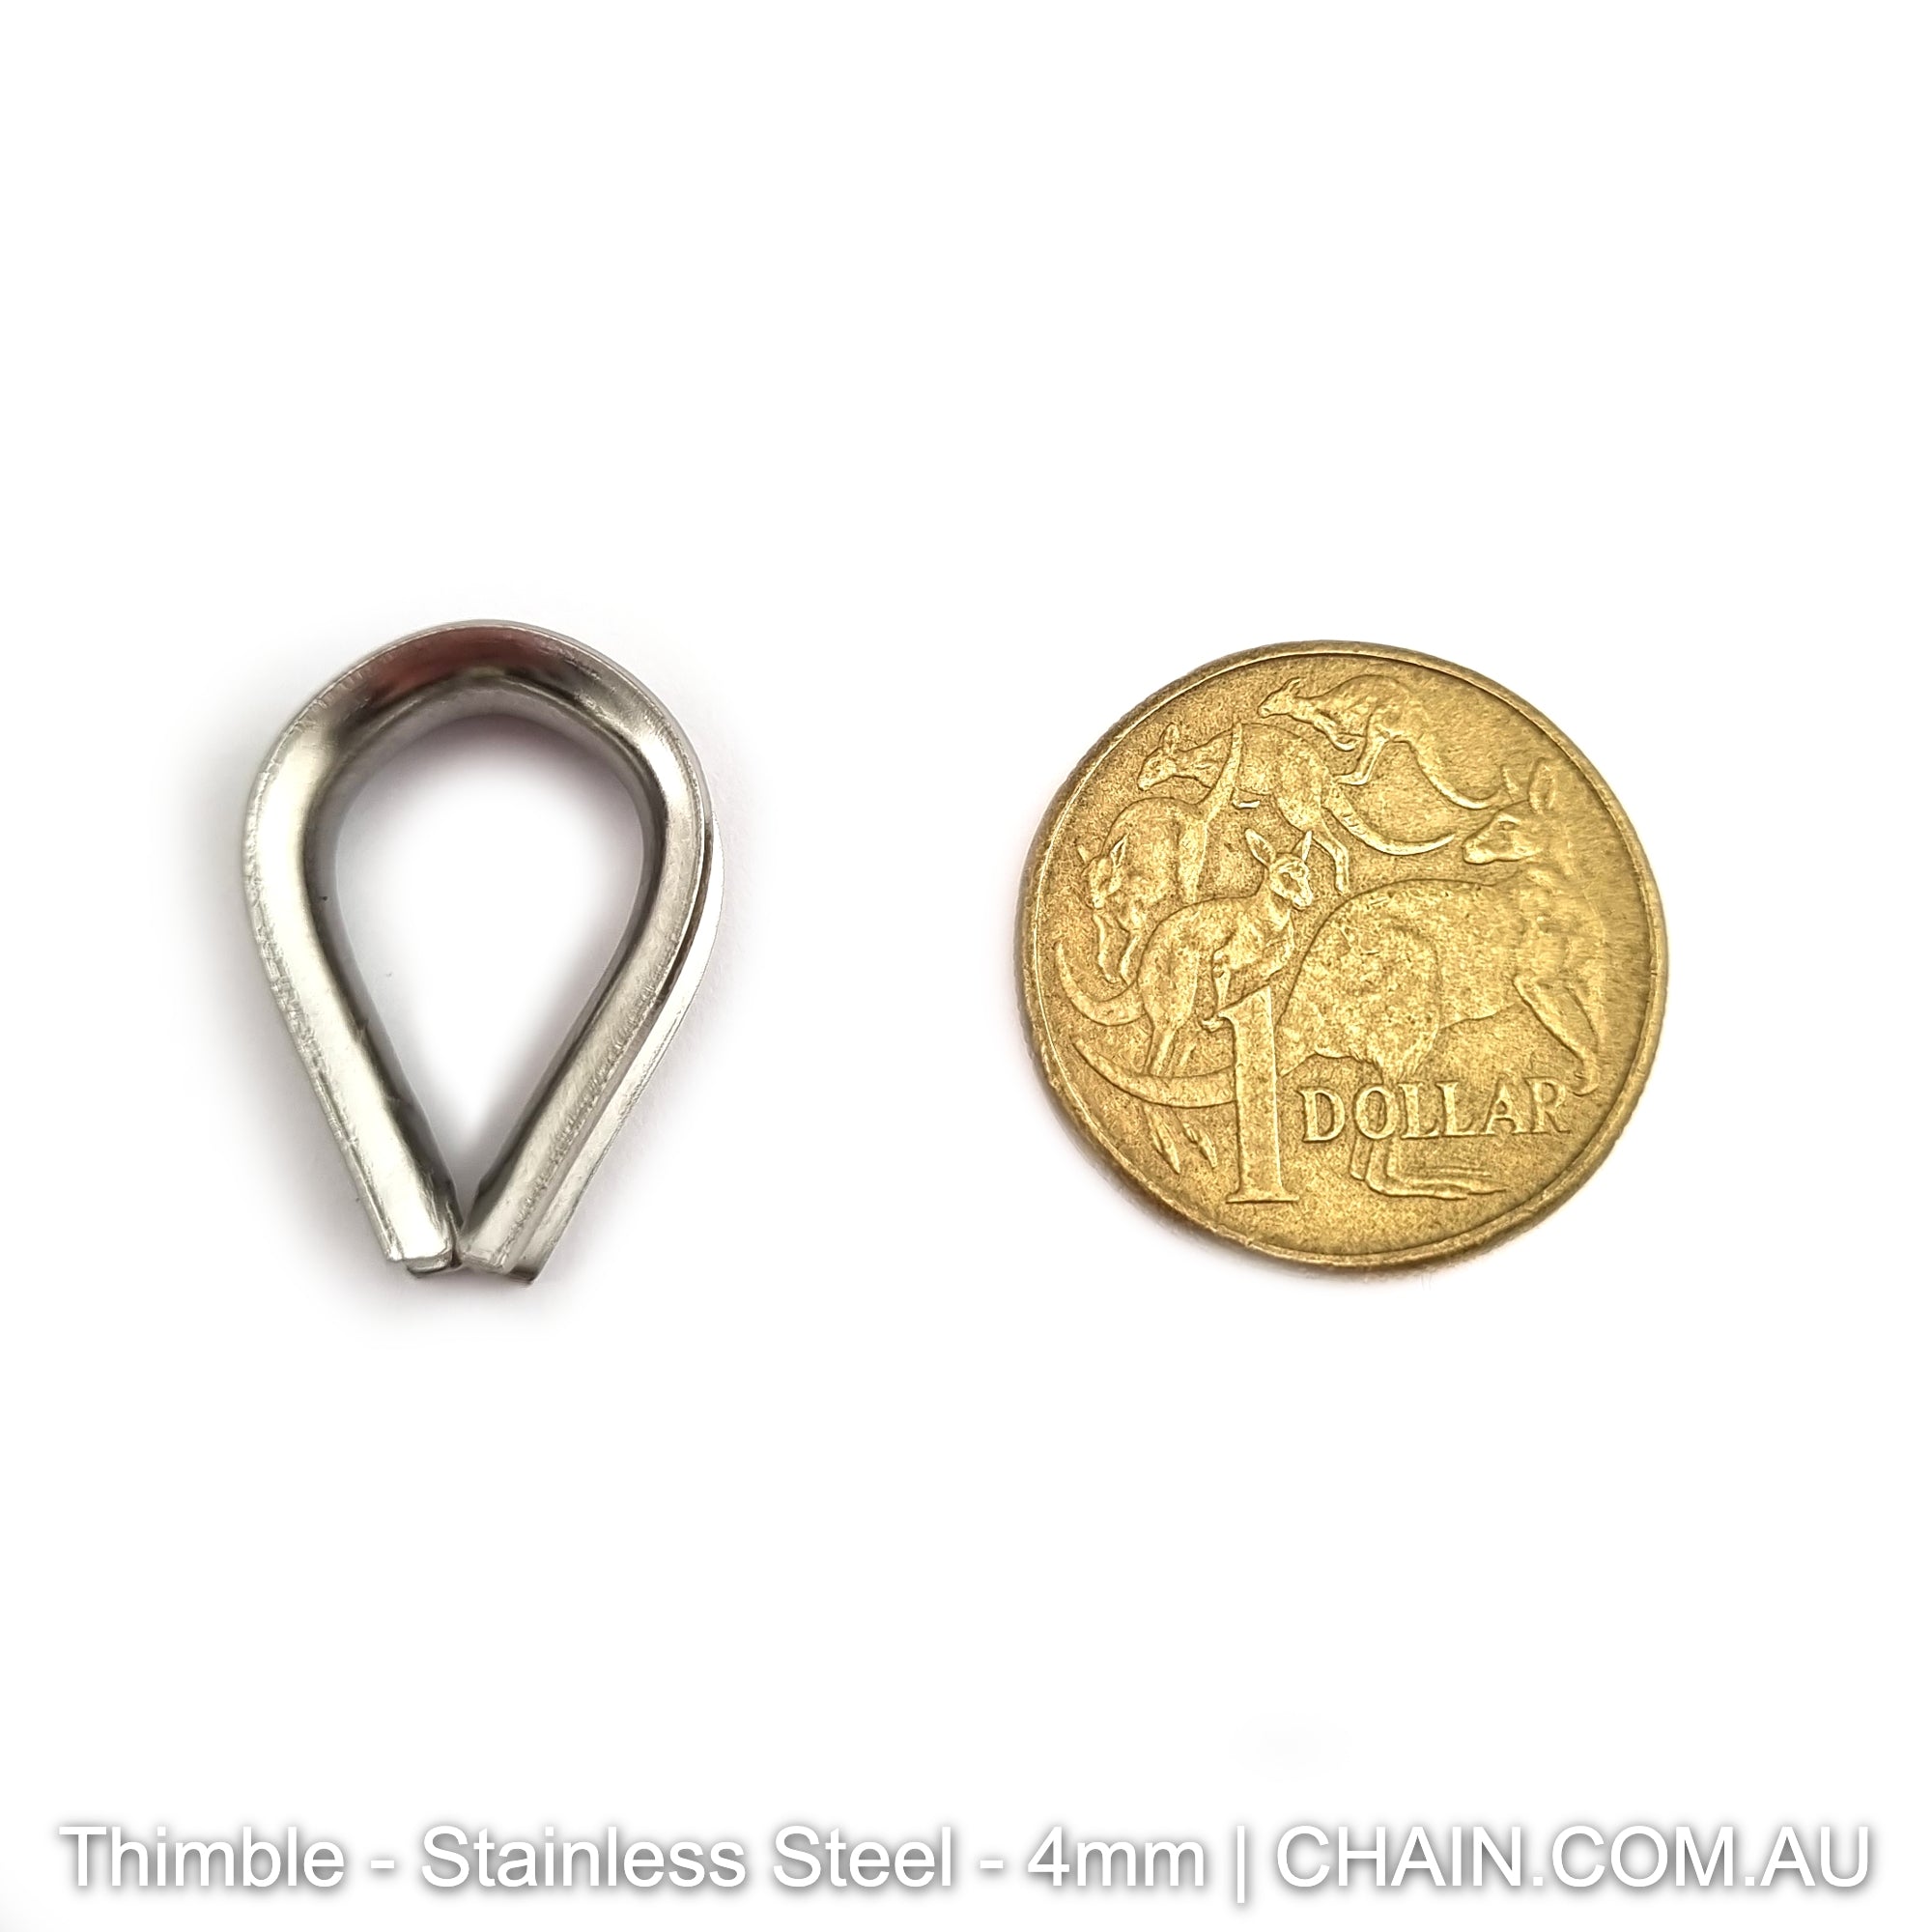 Stainless steel thimble, size 4mm in type 316 marine grade stainless steel. Shop hardware online. Australia wide shipping + Melbourne click & collect.